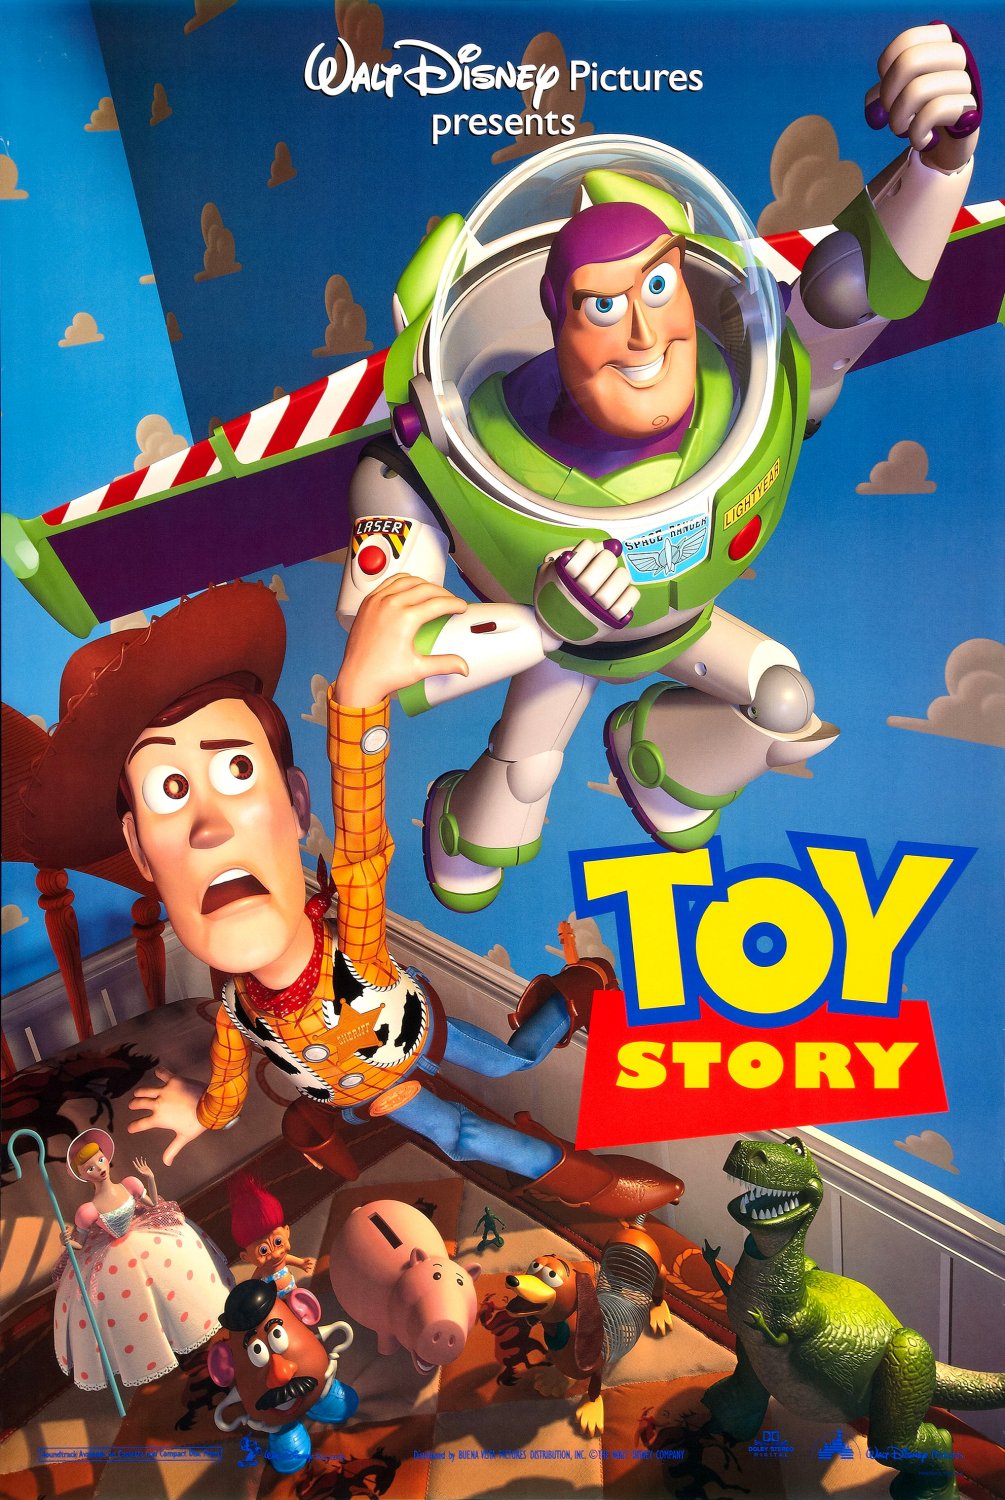 1. Toy Story (1995): The Adventures of Talking Toys